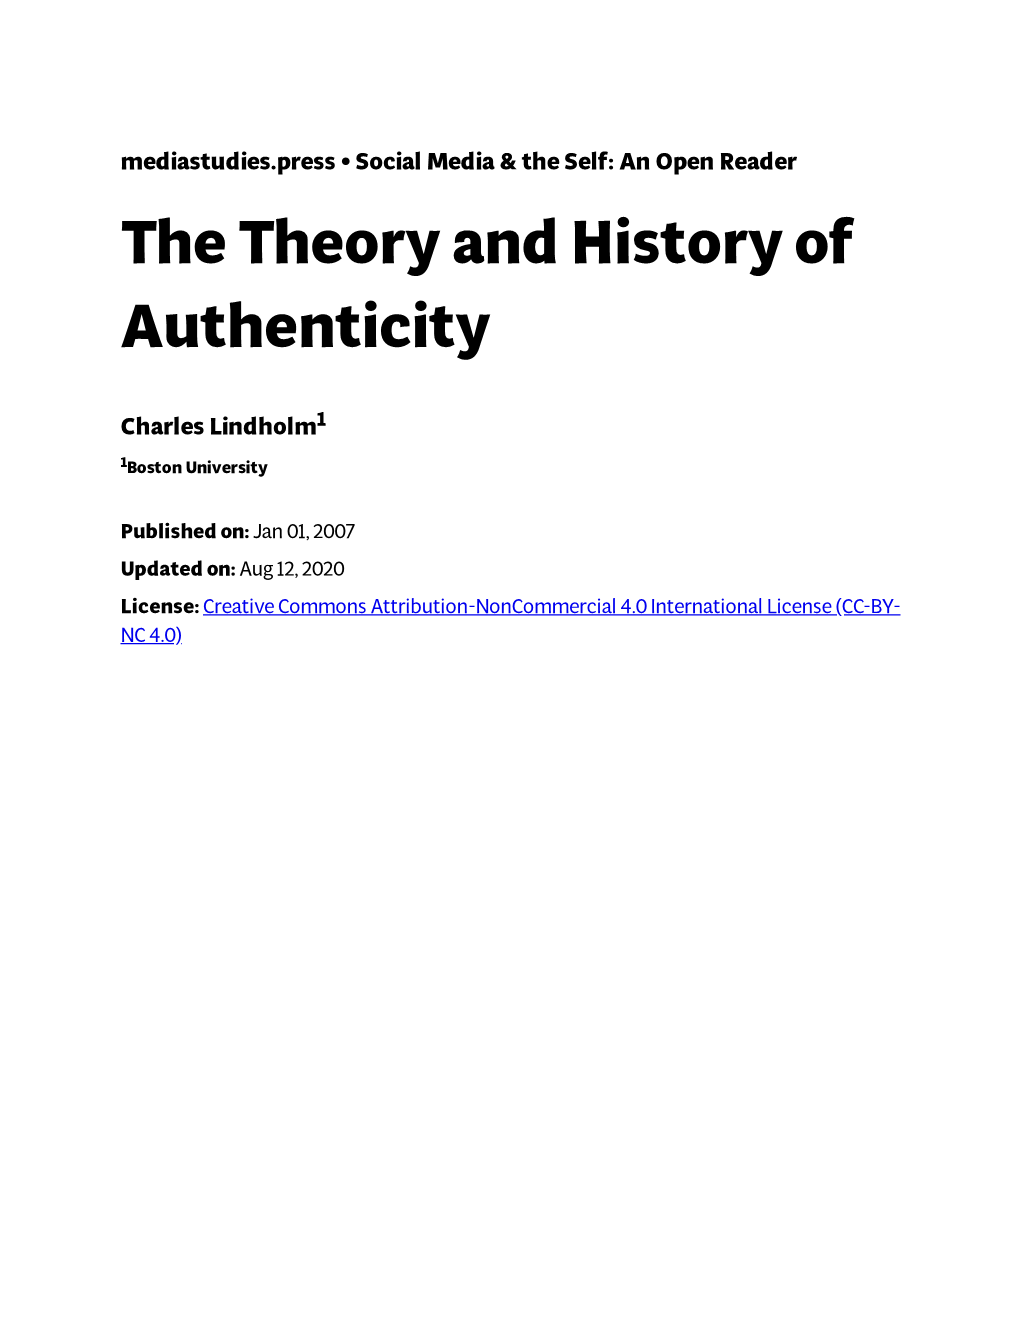 The Theory and History of Authenticity